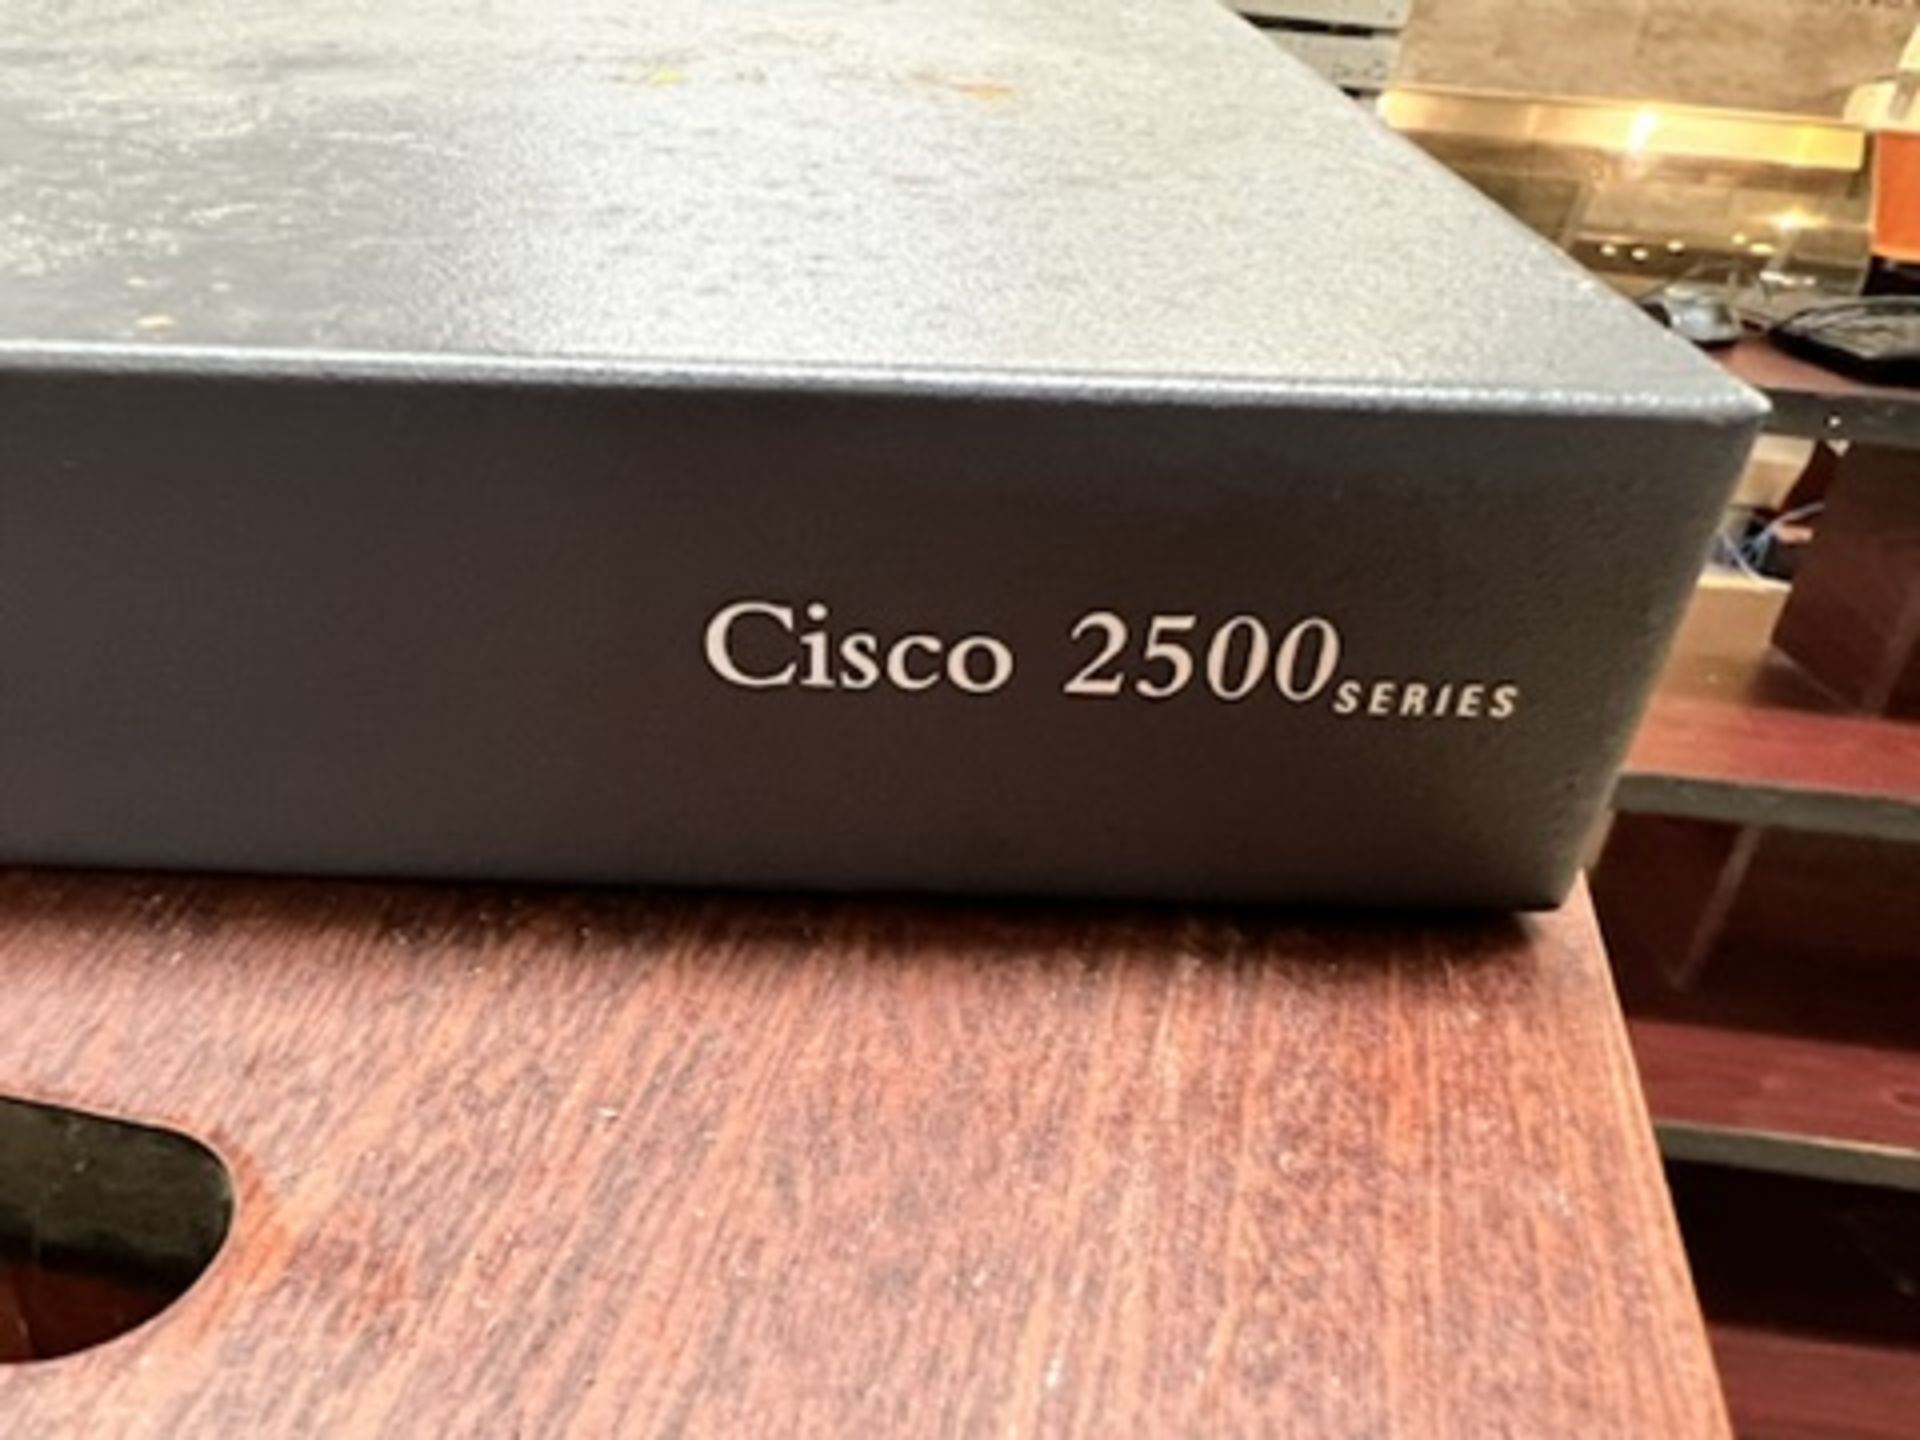 Lot of: (2) Cisco 2500 series routers , (1) Cisco IAD 2400 Series router, (2) Linksys 24-port intern - Image 7 of 18